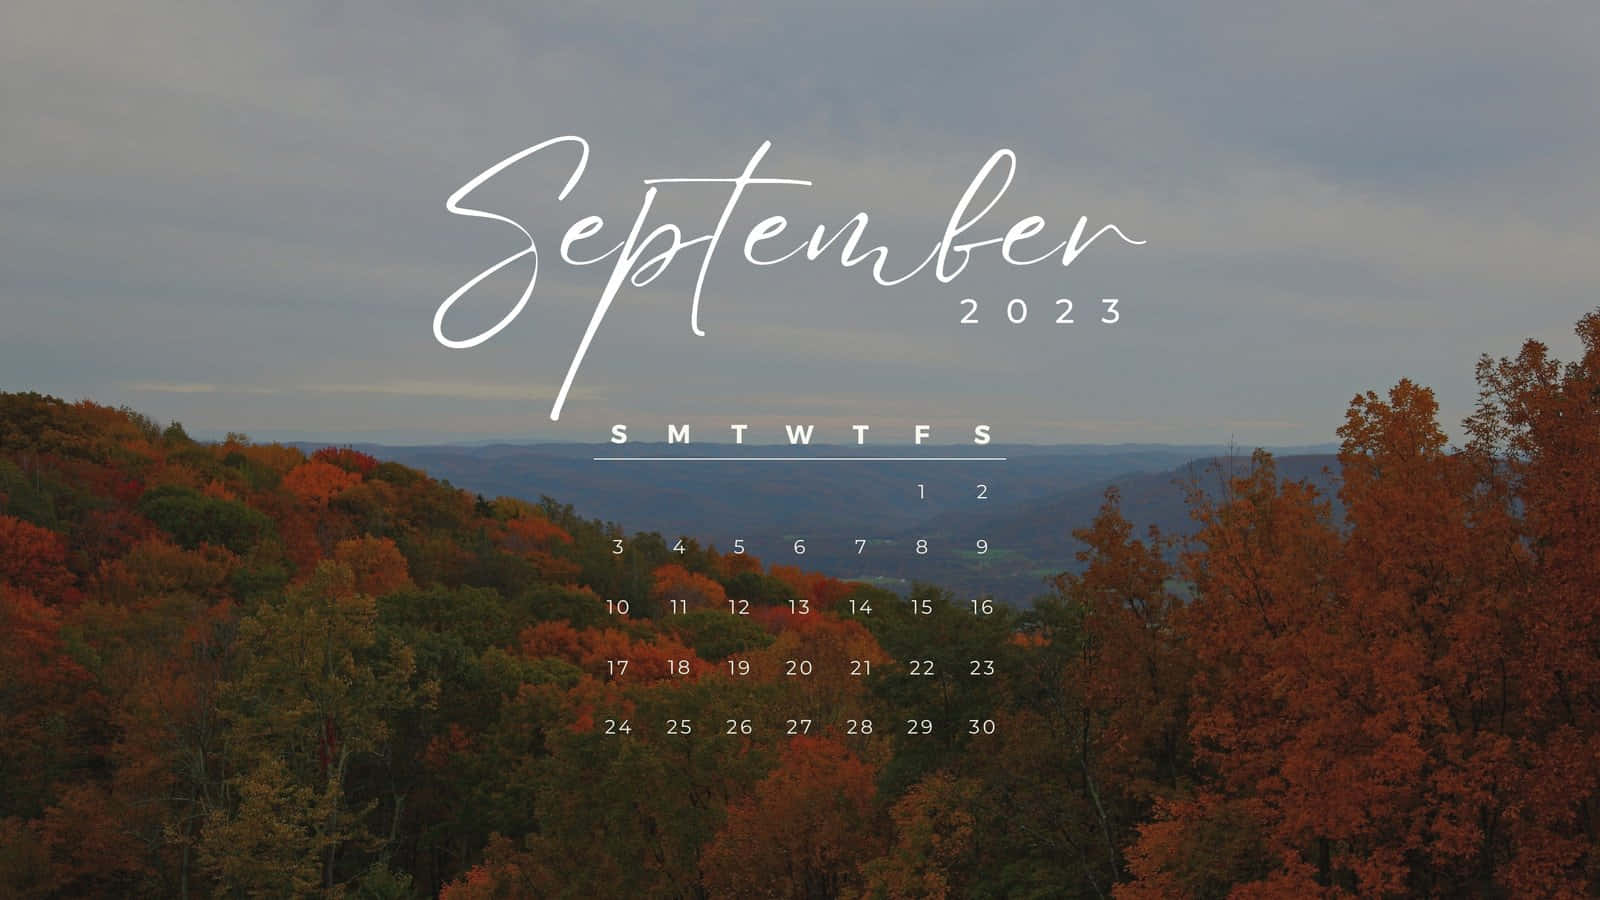 Welcome September in all its beauty